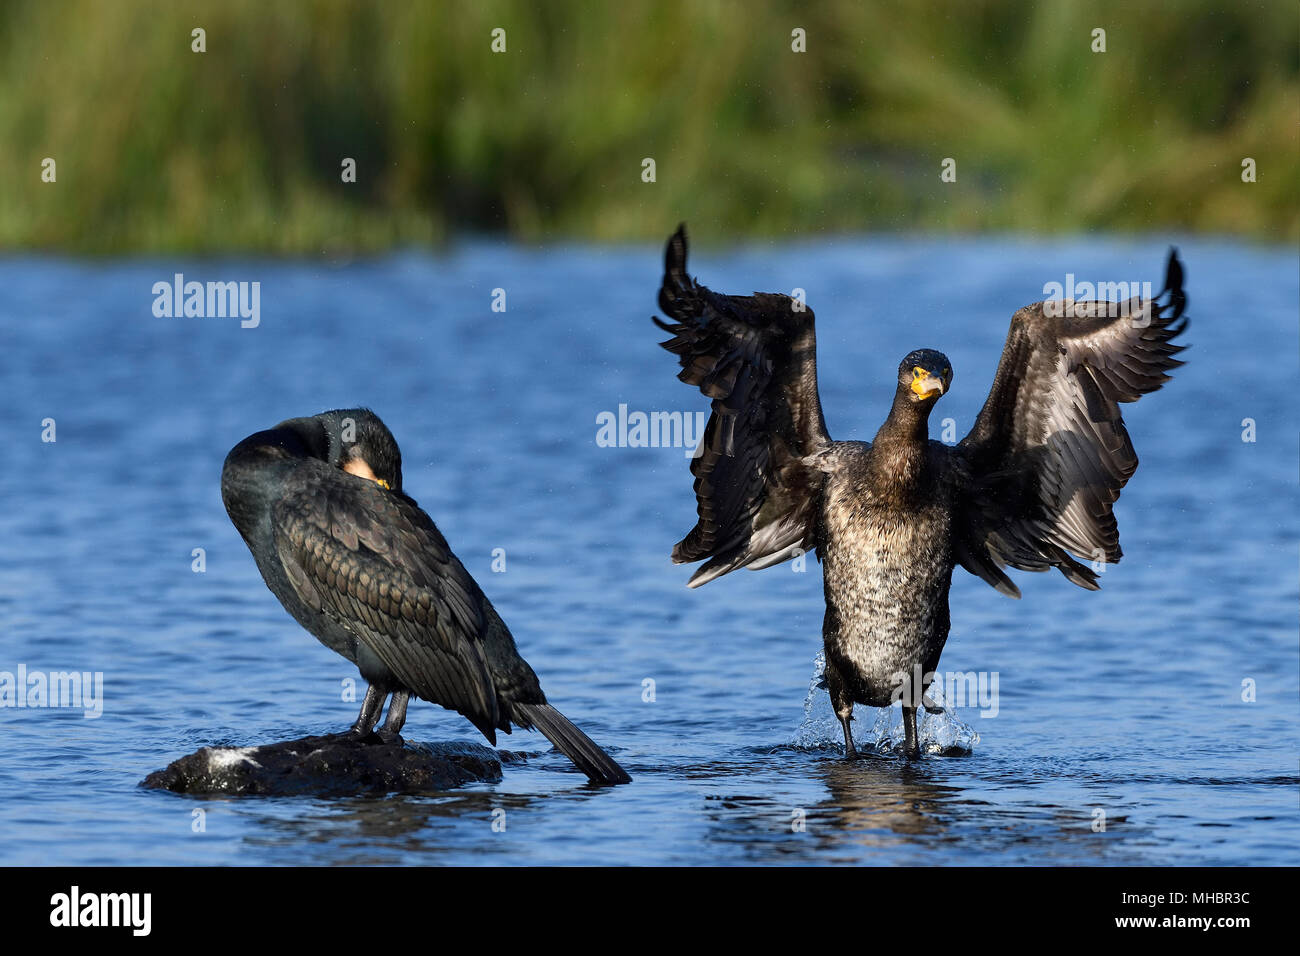 Two Great cormorants (Phalacrocorax carbo), standing in shallow water, one sleeping, one flapping his wings, Lower Rhine Stock Photo